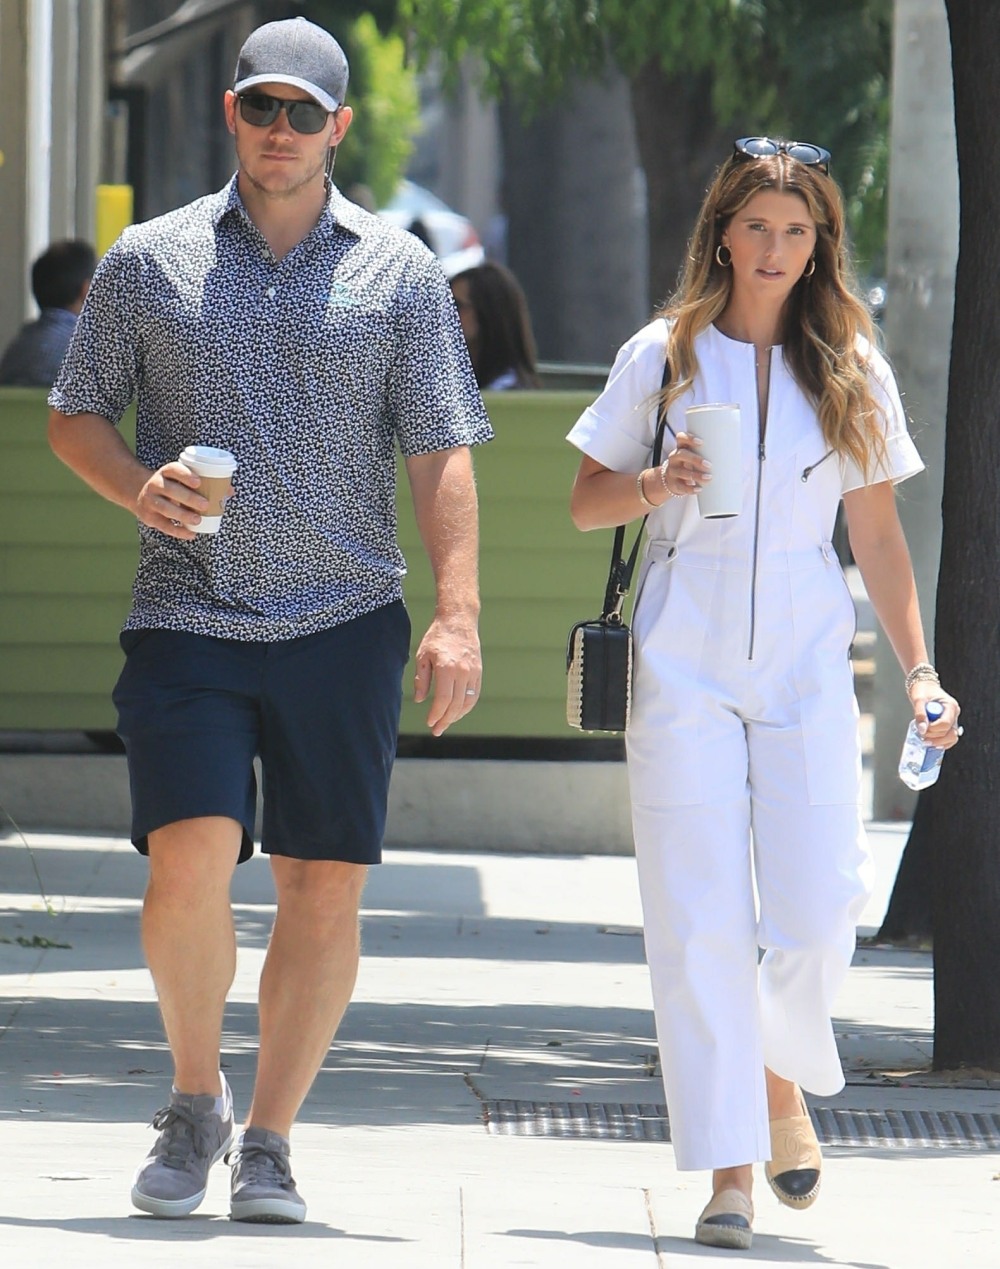 Chris Pratt and wife Katherine Schwarzenegger go out and about in West Hollywood with coffee in hand